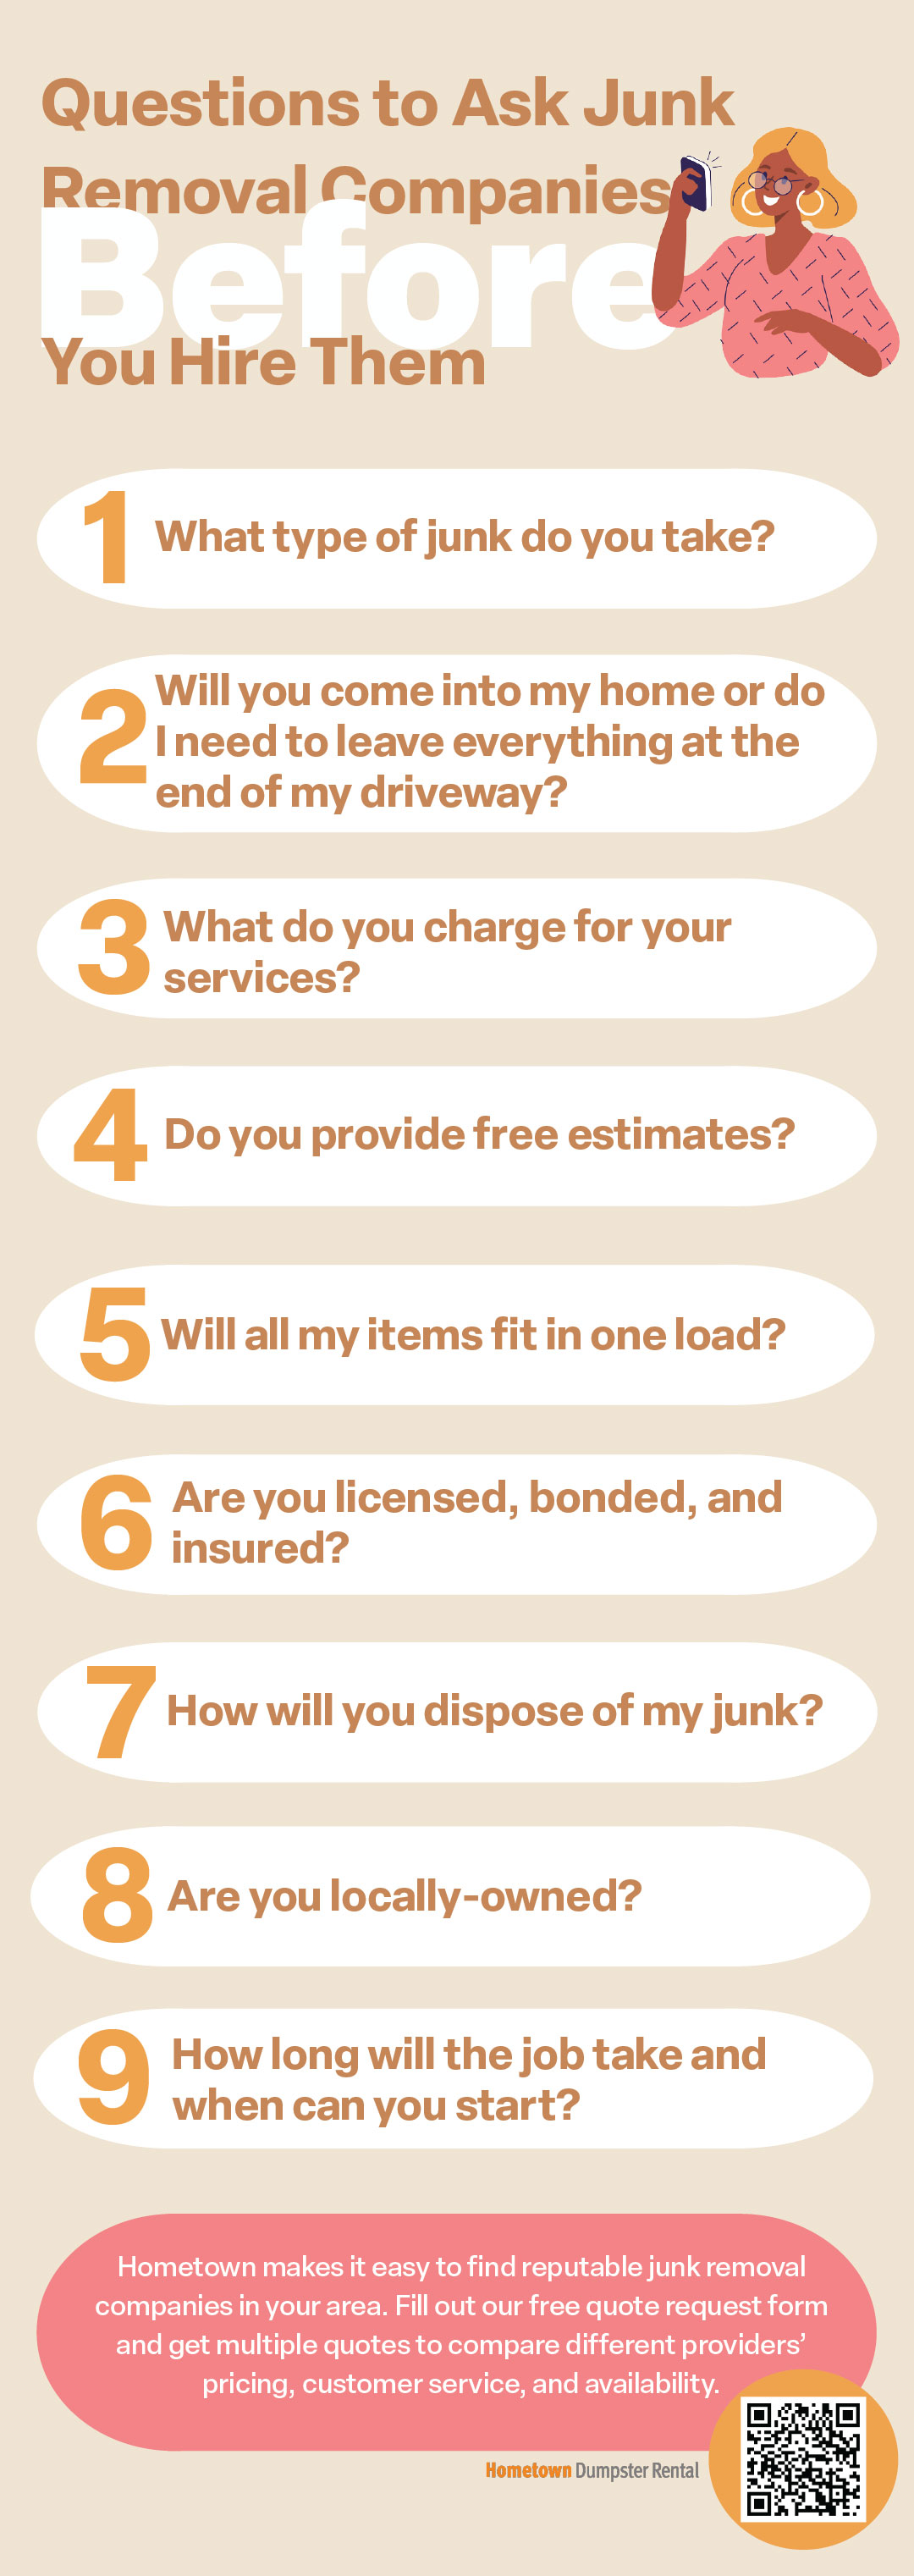 Questions to ask junk removal companies before hiring infographic